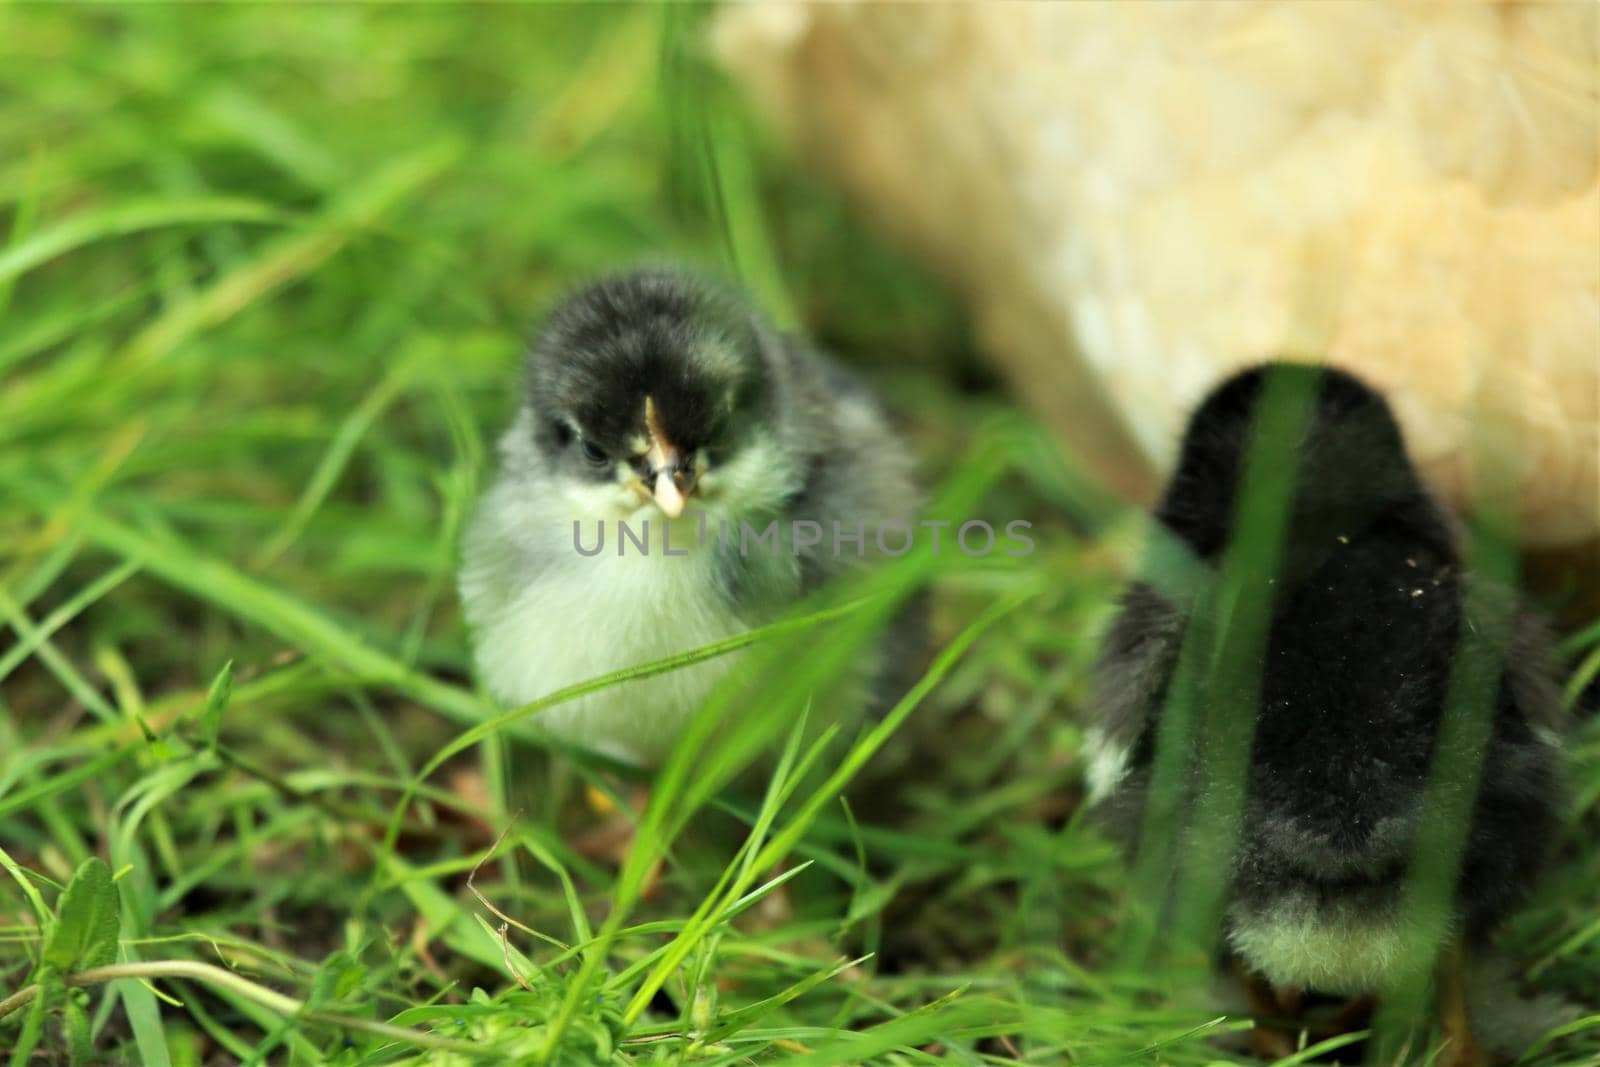 A little young chicken chick in the grass by Luise123